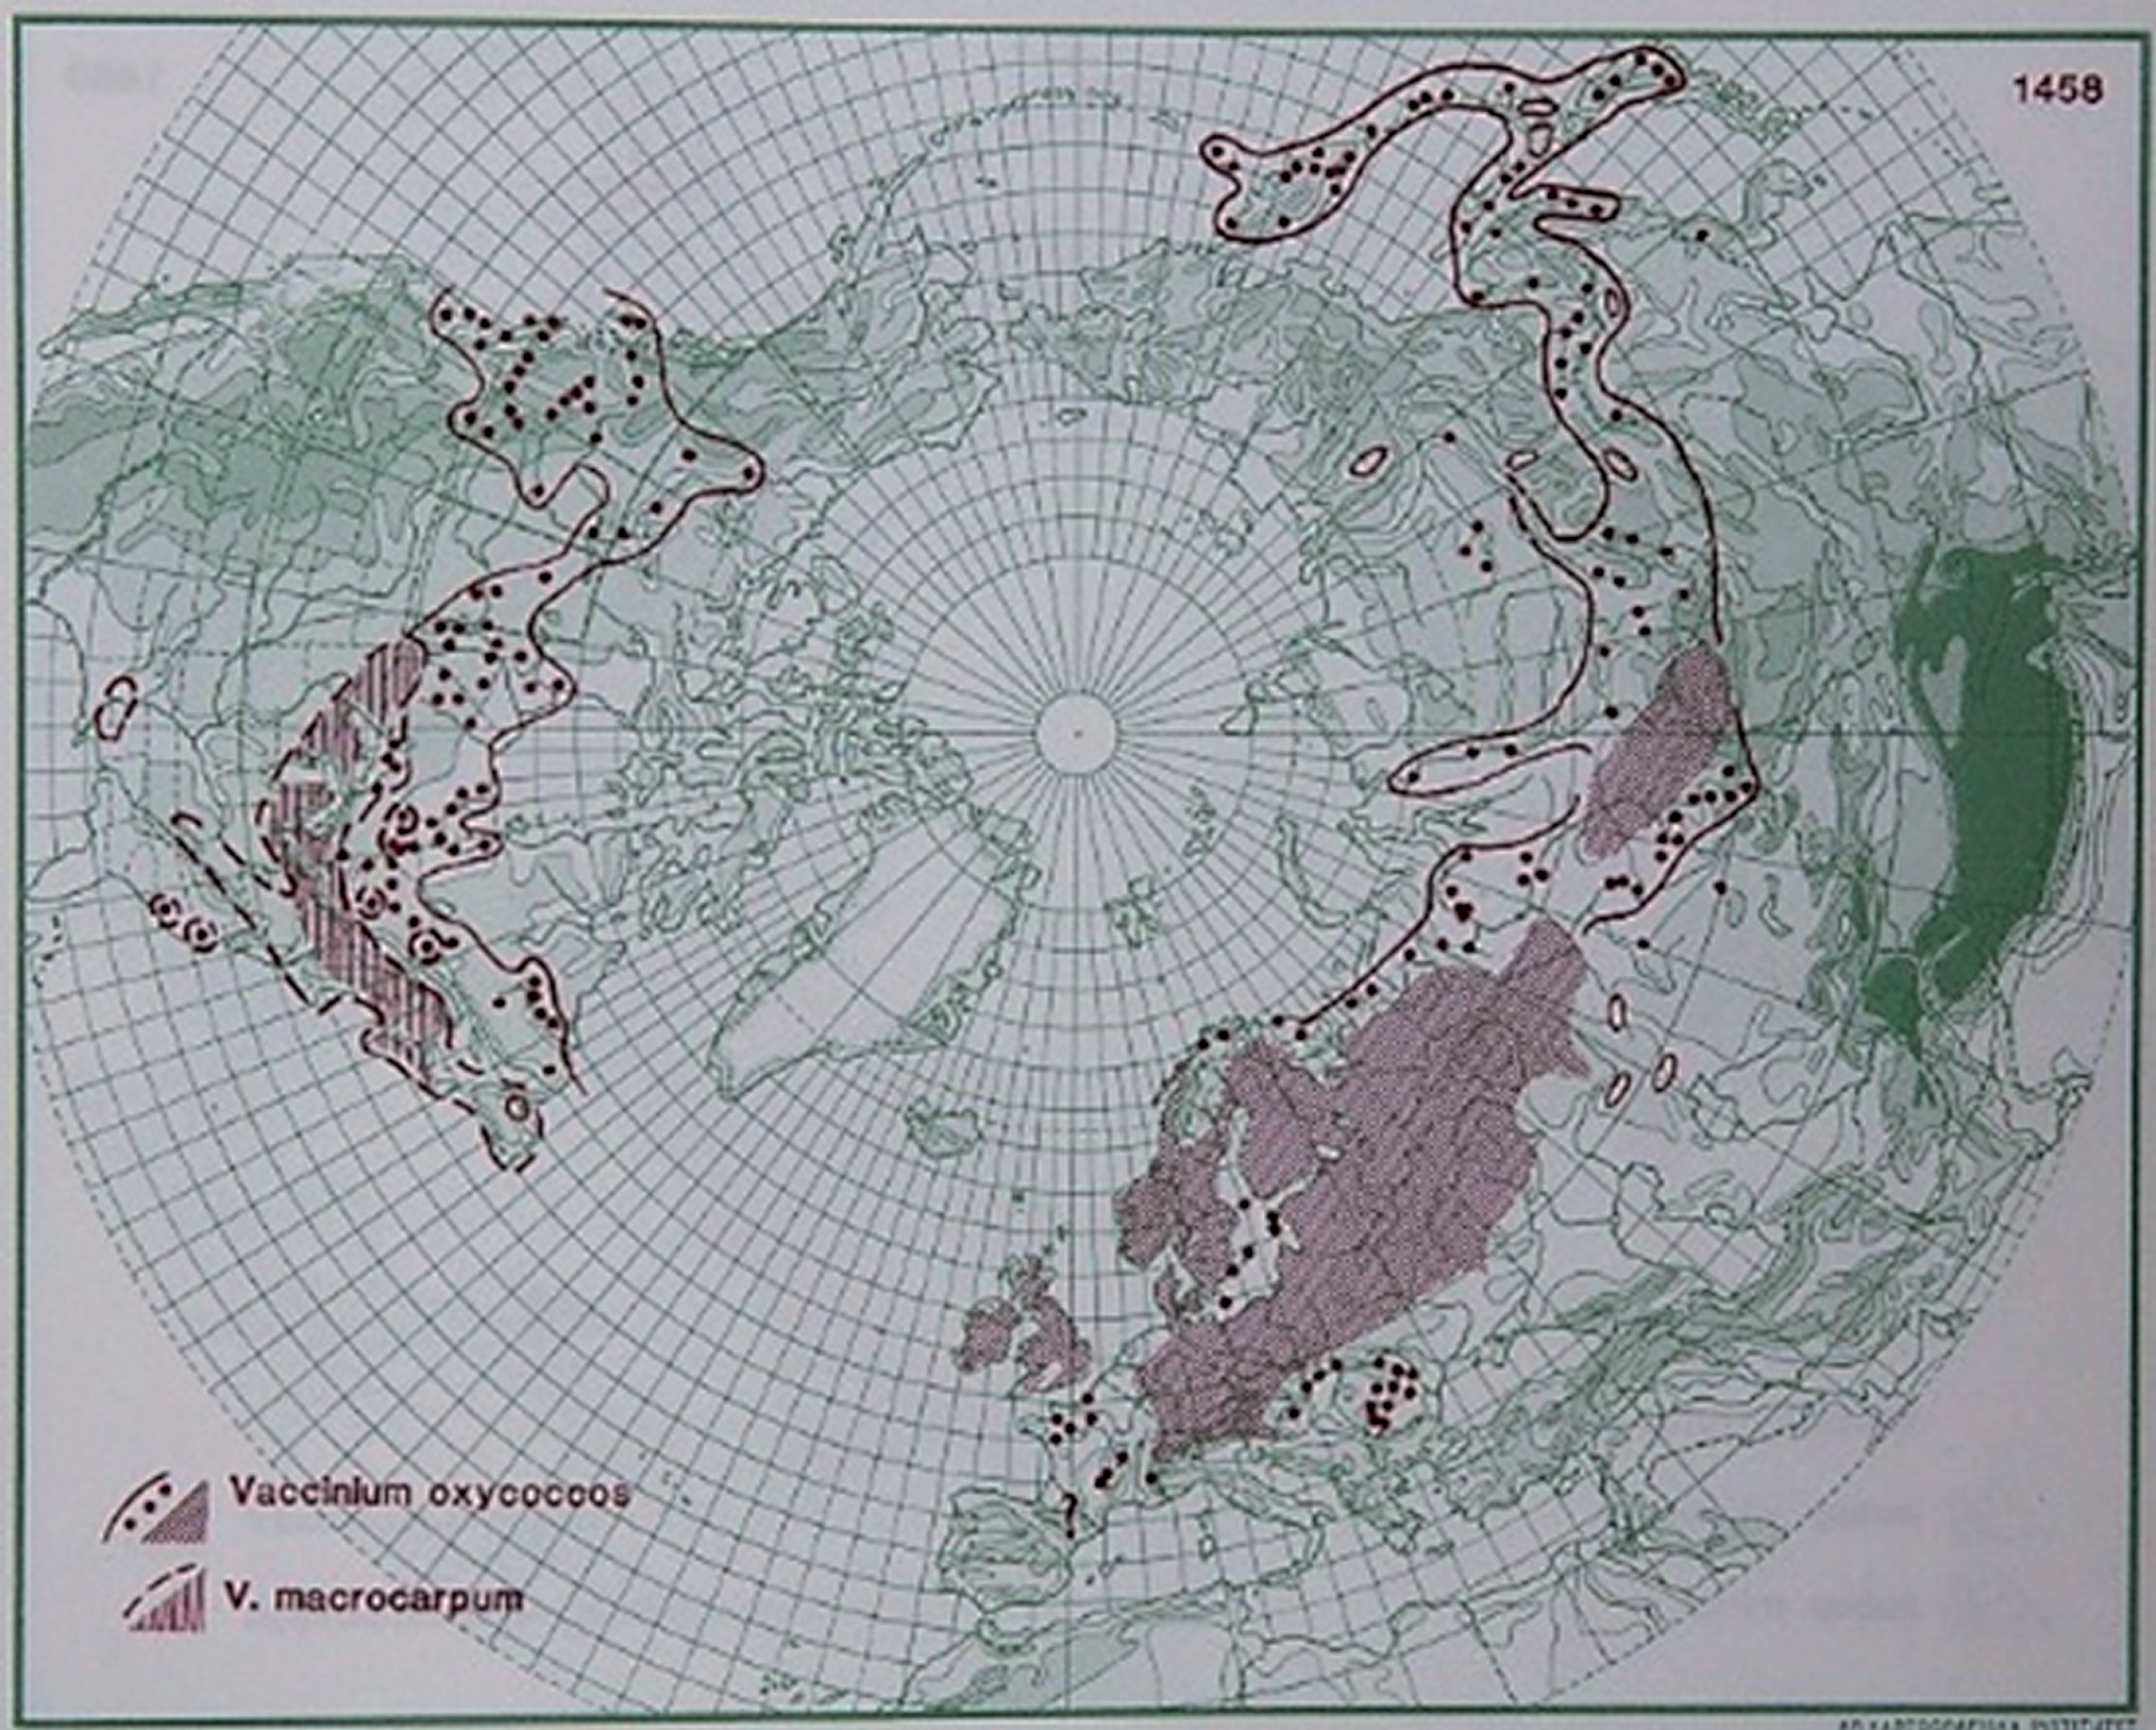 Distribution of V. oxycoccos L. and ssp. macrocarpum in the northern hemisphere (Hultén and Fries 1986), with the kind permission of Per Koeltz.